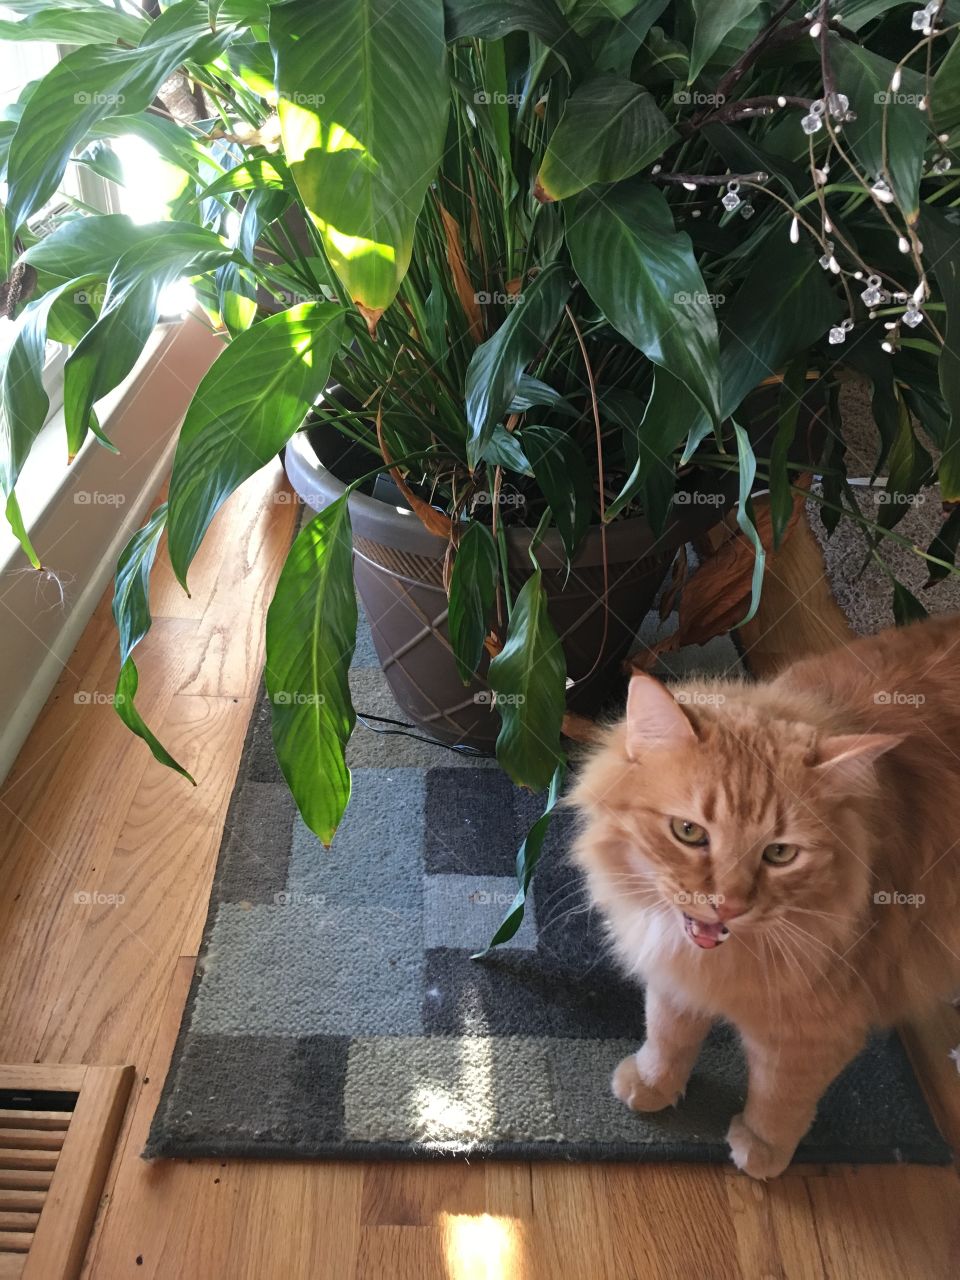 A beautiful, orange, long-haired cat (named Apollo) meowing for attention next to a healthy green peace plant